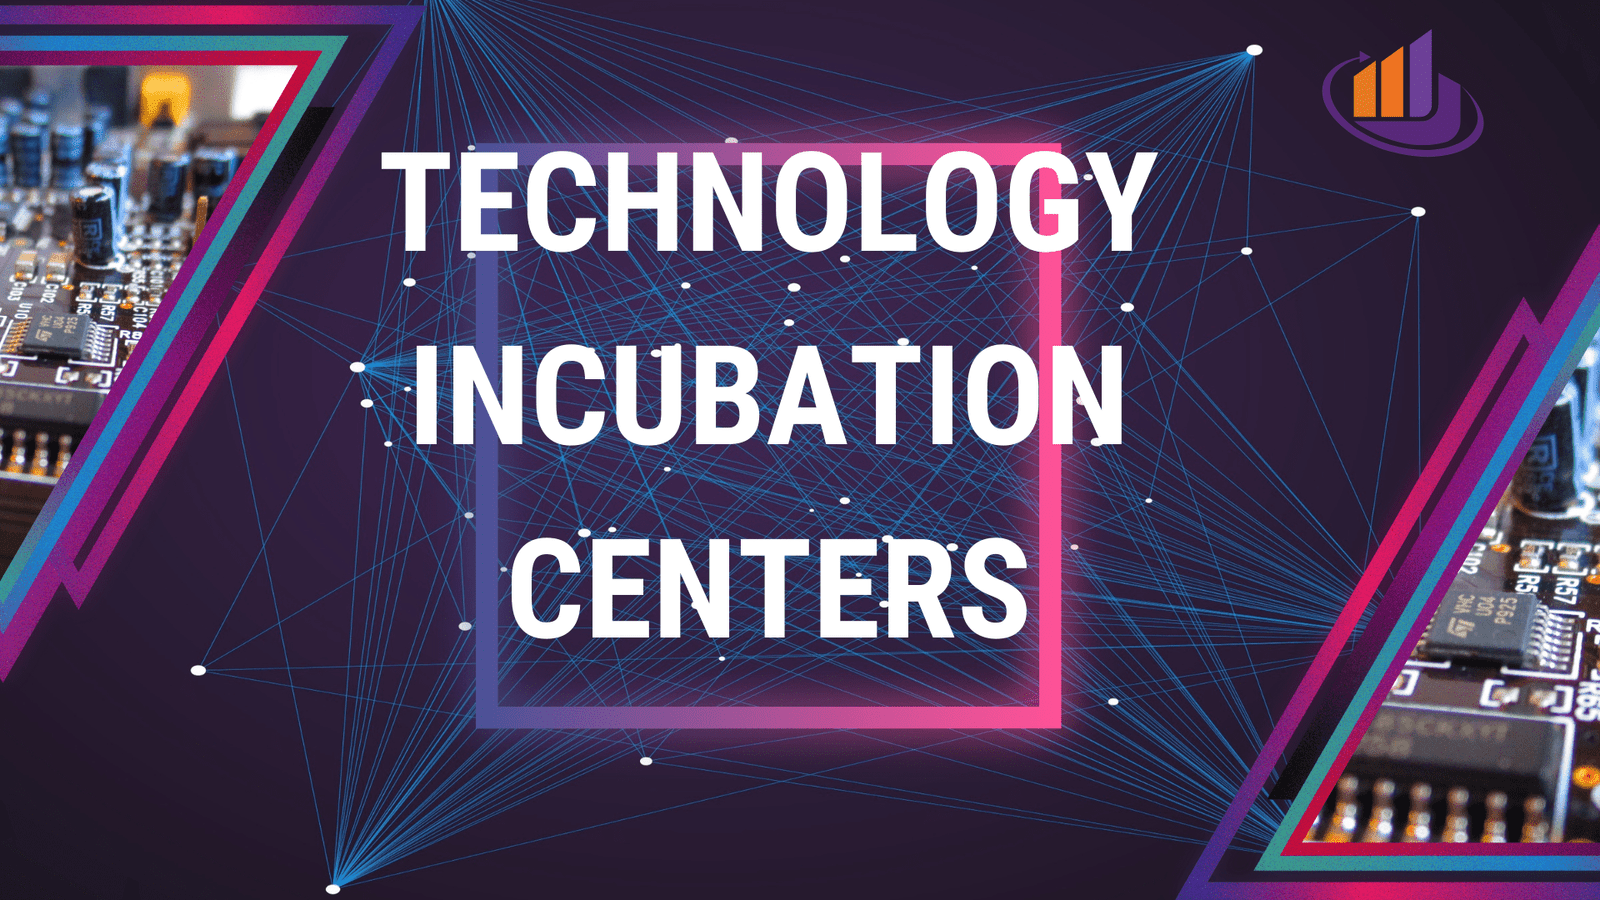 Technology Incubation Centers are defined as organizations that provide services to startups for their growth & development.